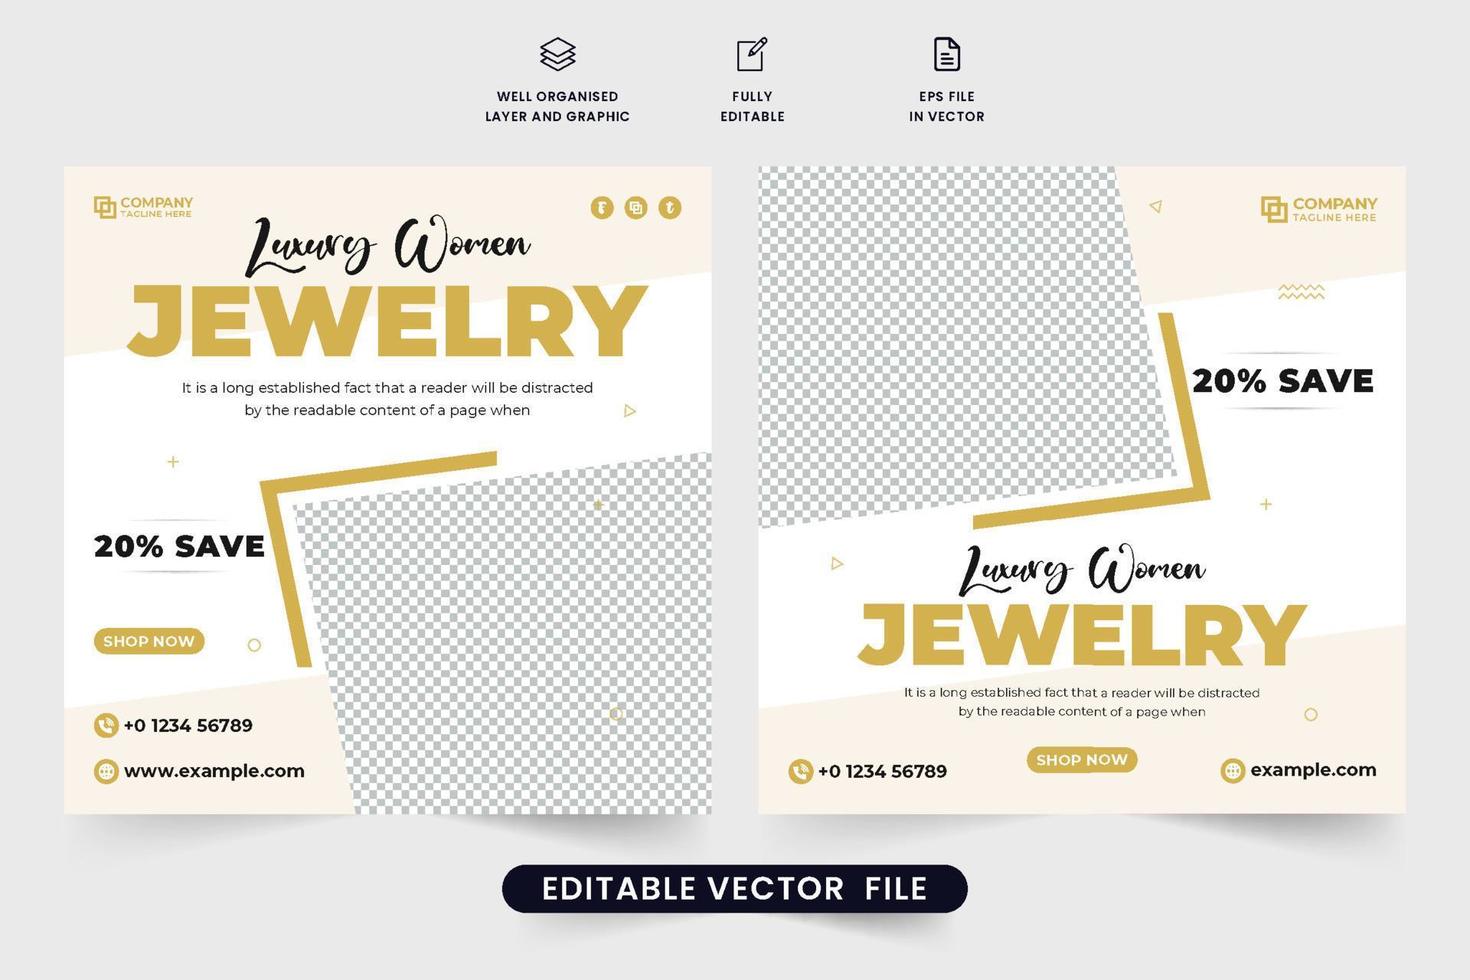 Modern jewelry business social media post vector with abstract shapes. Ornaments promotional web banner design with geometric shapes. Special jewelry sale poster vector with photo placeholders.